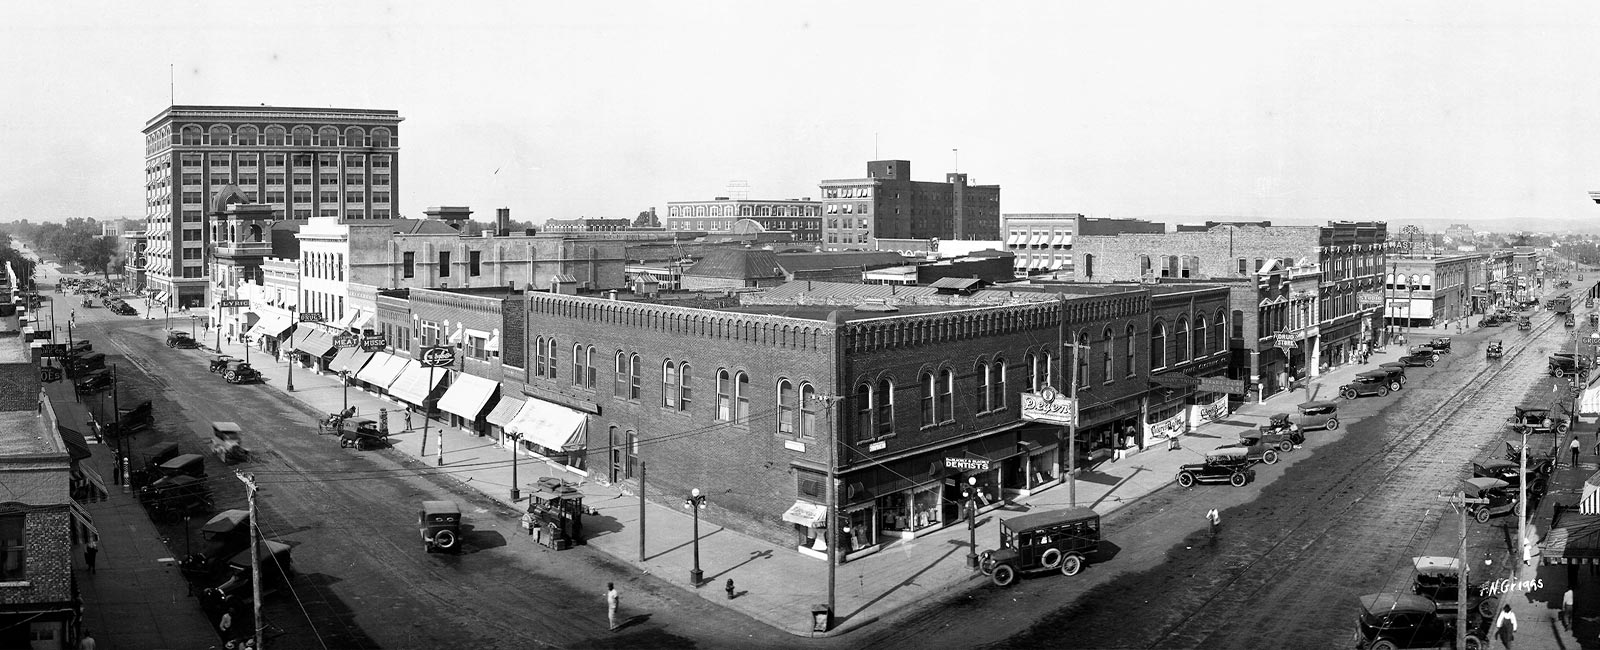 Visit Bartlesville Culture & History photo. Photo courtesty of Bartlesville Area History Museum